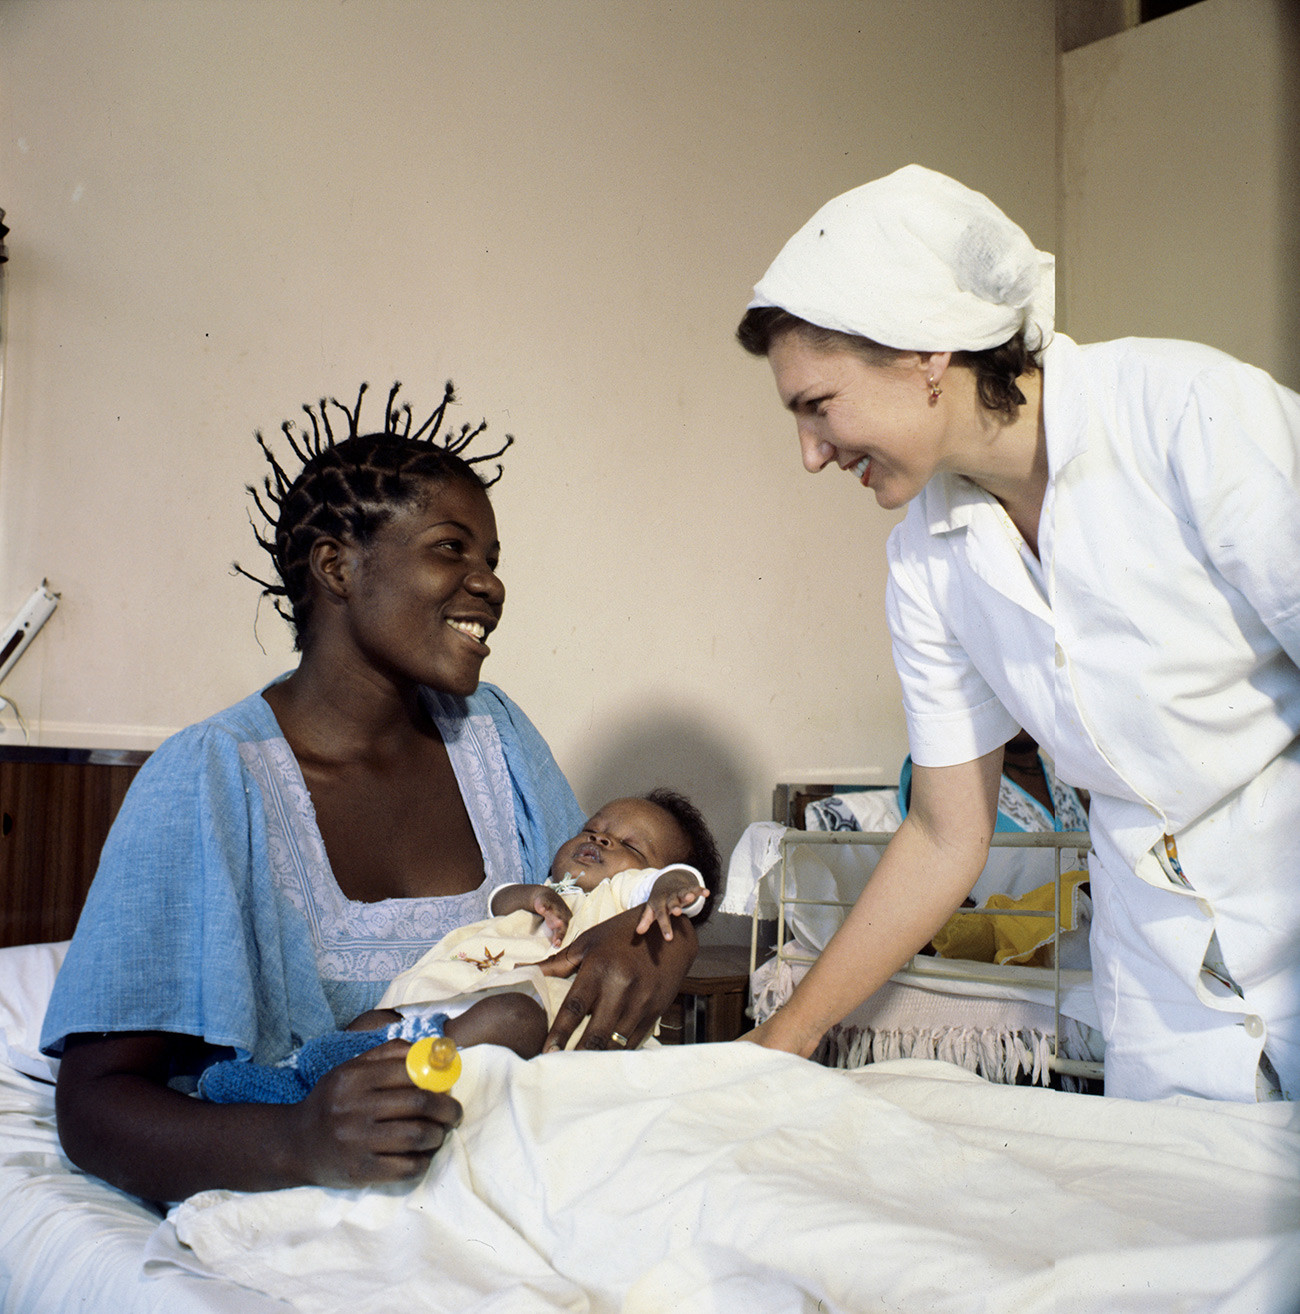 Among other things, the USSR was helping Africa with medics. A Soviet midwife in Lubango, Angola.